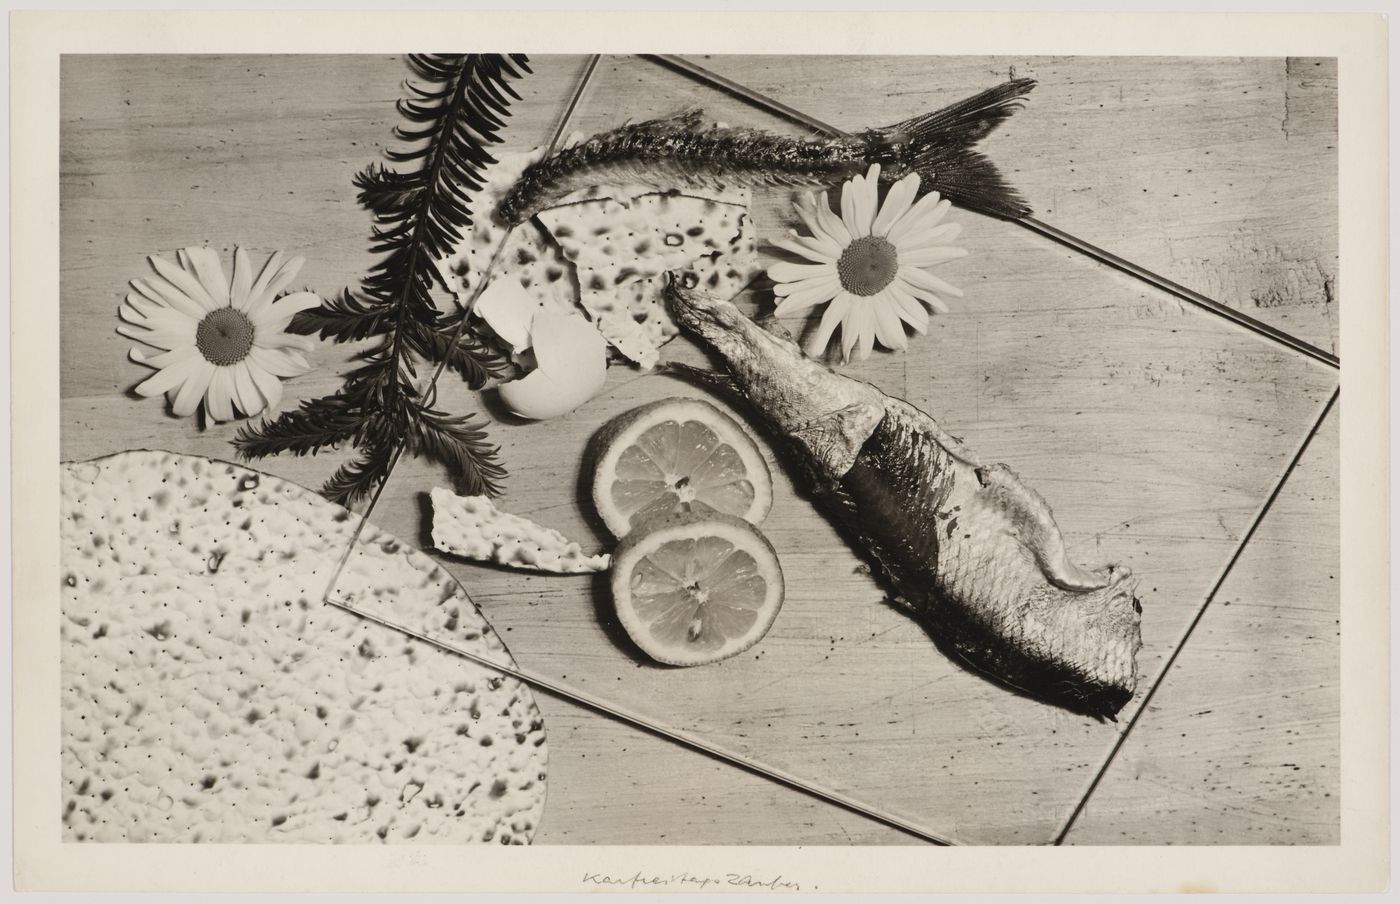 Still life by Walter Peterhans composed of fish skins and tail, matzah, lemon slices, egg shells, daisies, and an evergreen branch on a glass sheet, Bauhaus, Dessau, Germany